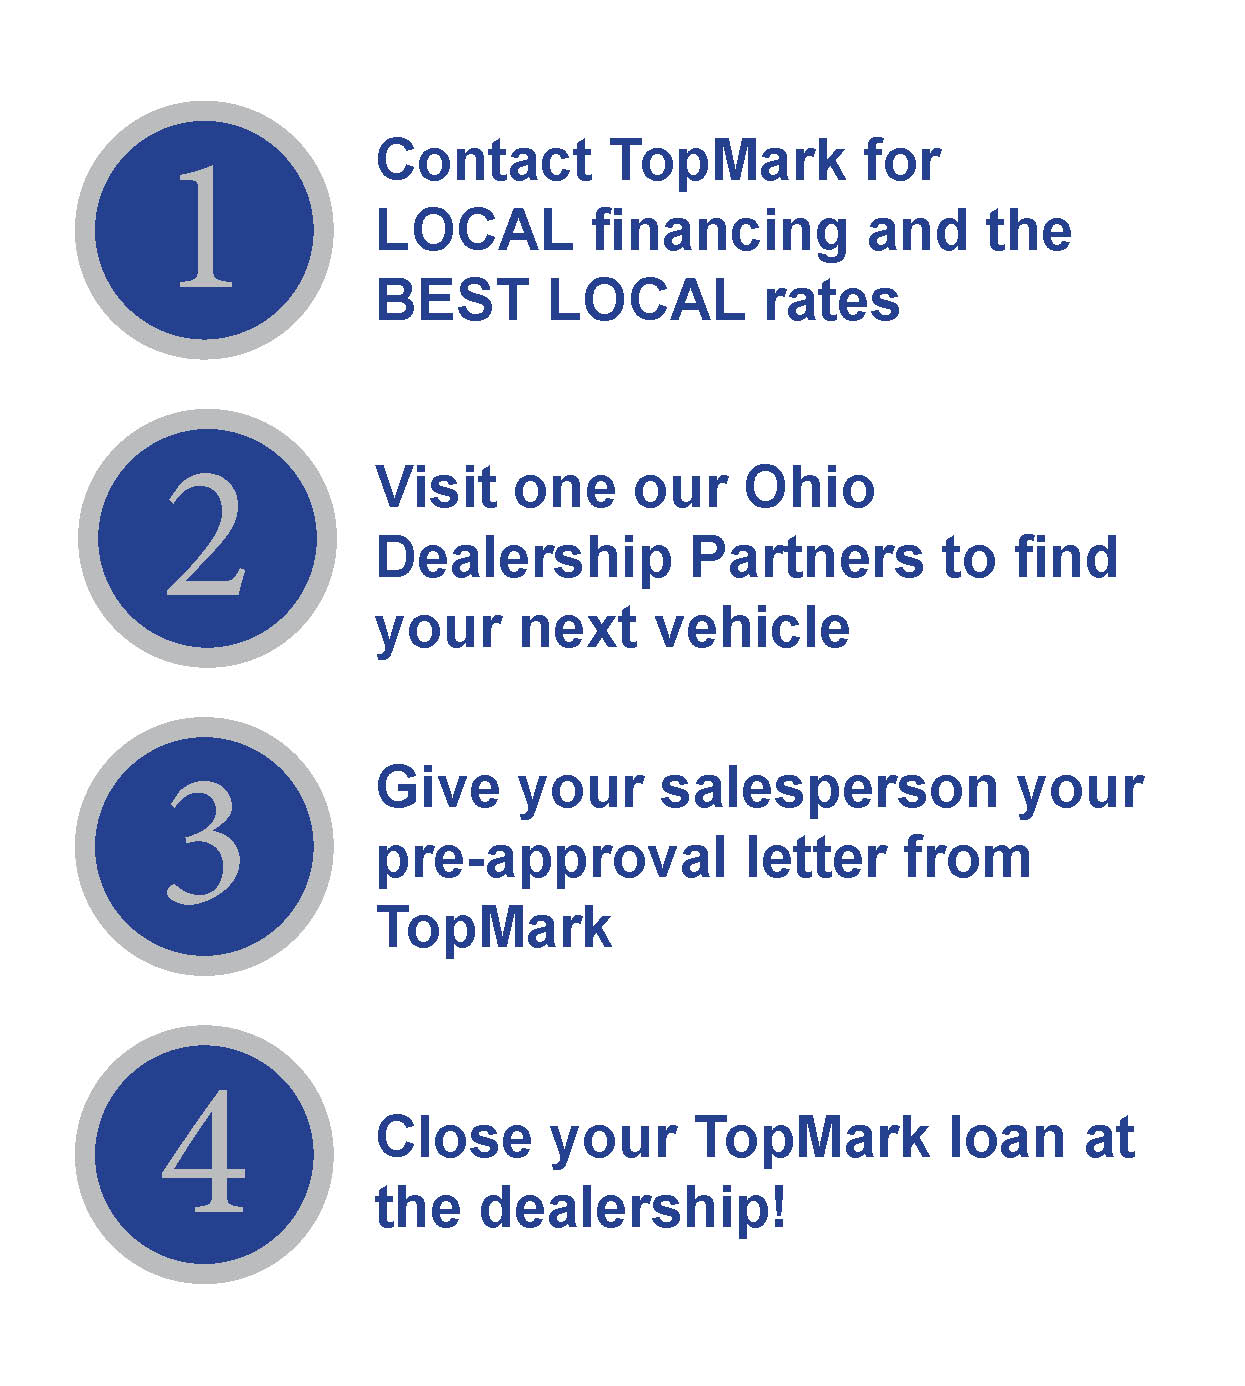 Contact TopMark for Local Financing